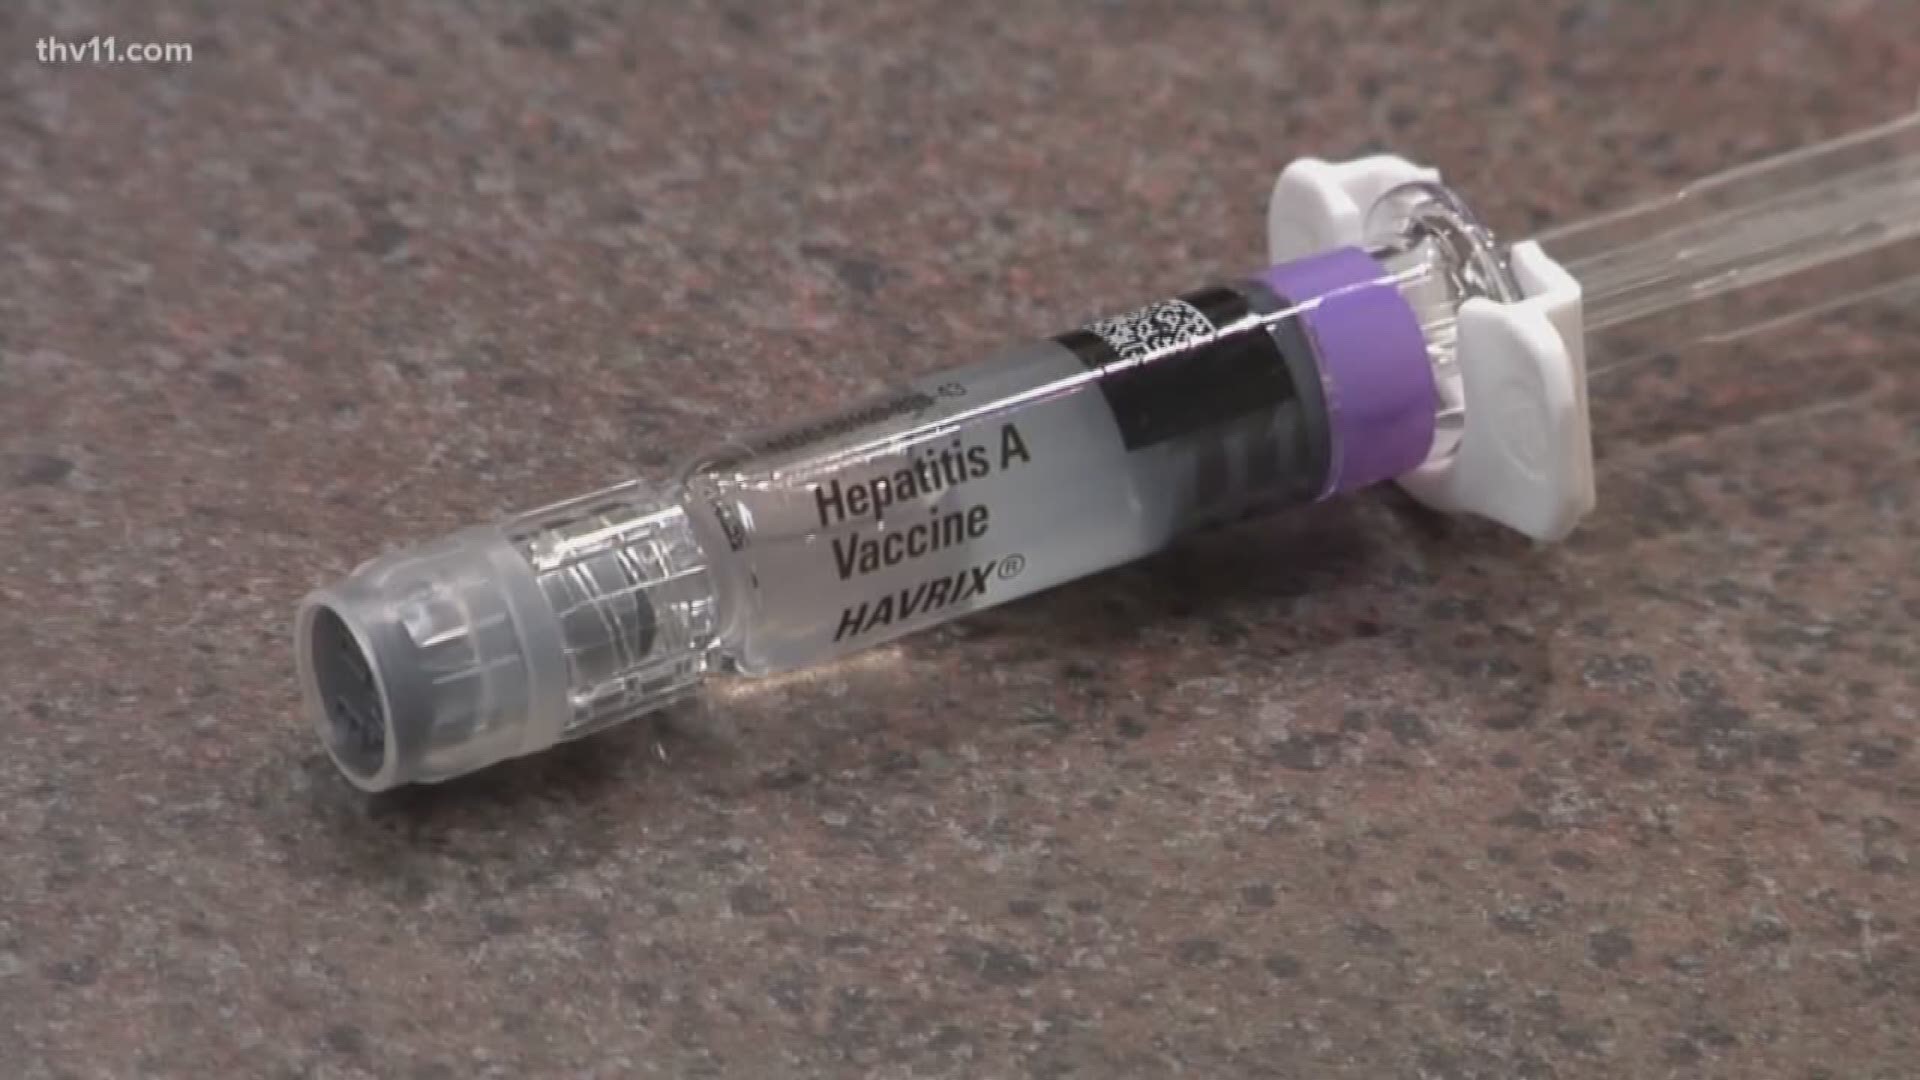 Northeast Arkansas dealing with another case of Hepatitis A this week.